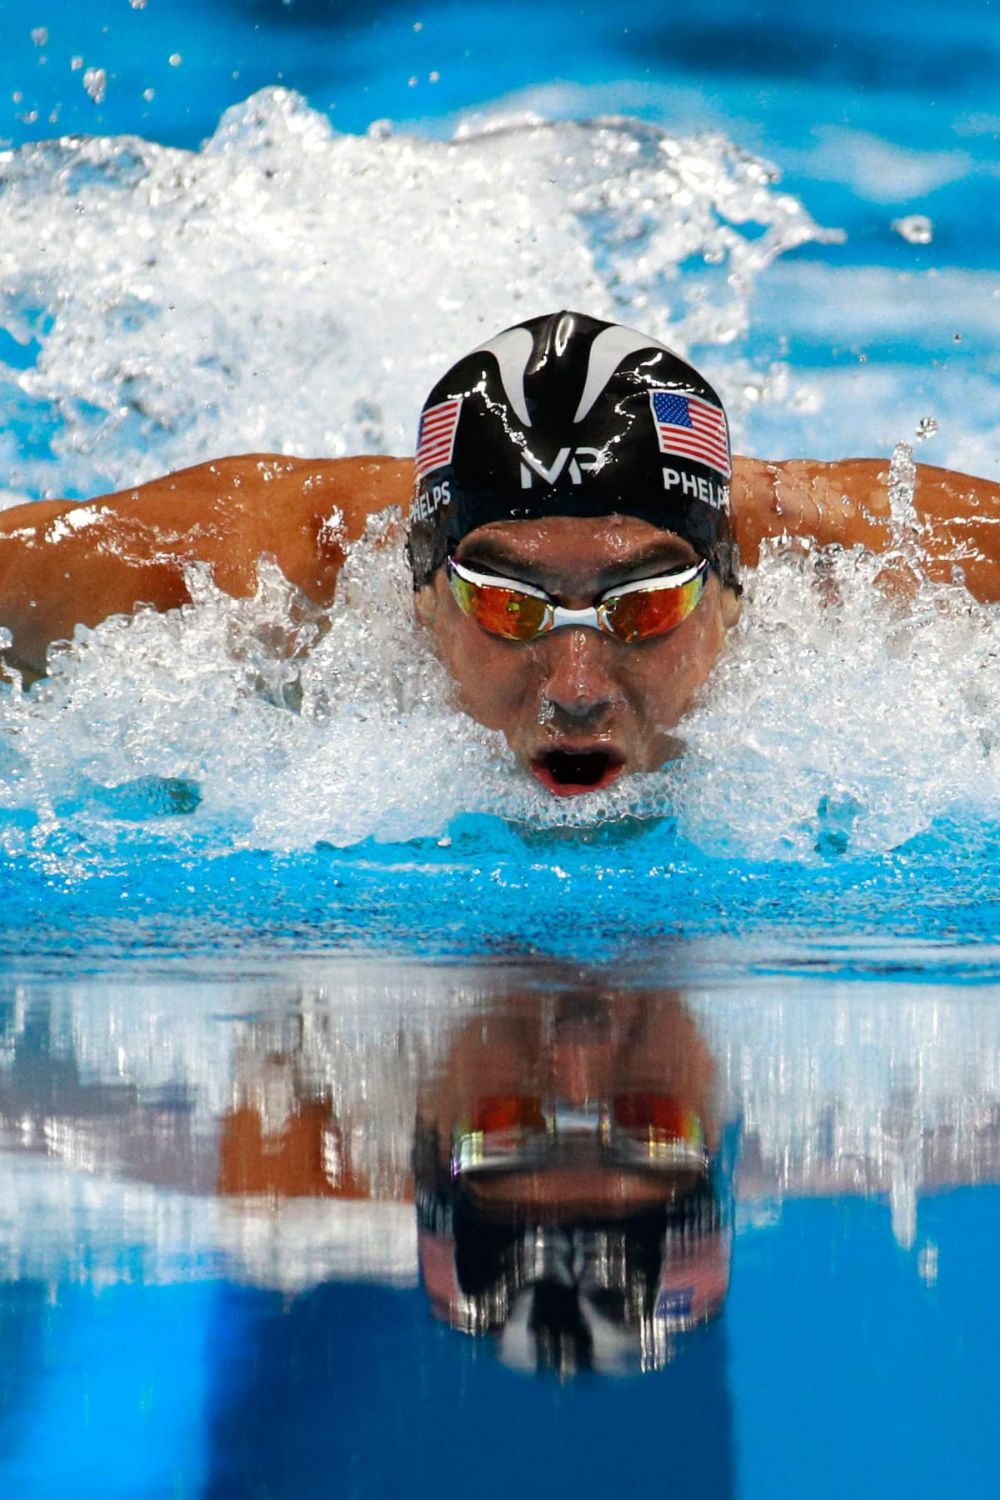 Michael Phelps Is The Best Swimmer In The World.